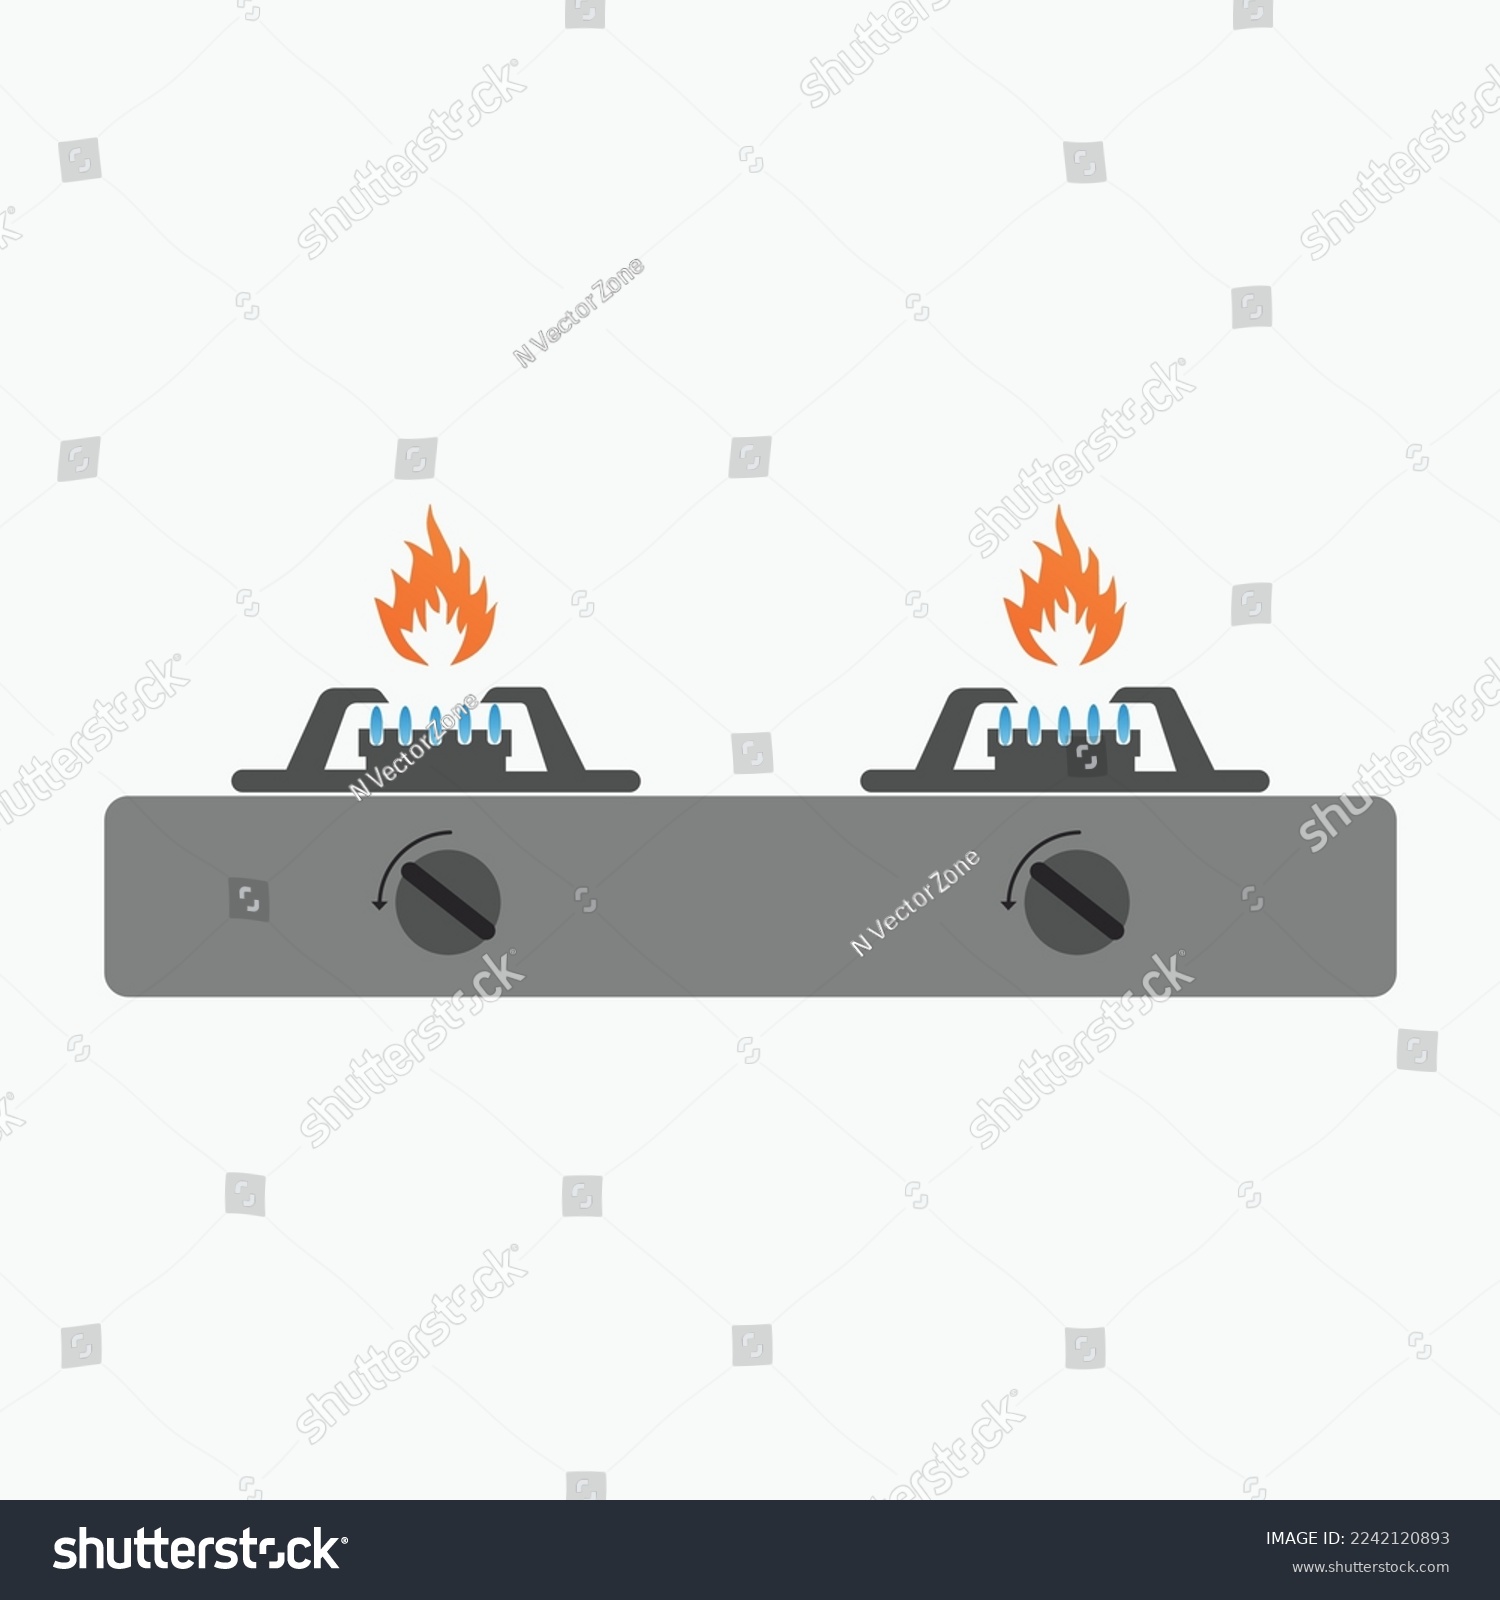 SVG of Gas stove icon. Vector illustration of Flame Gas Fire Stock illustration for free download. svg